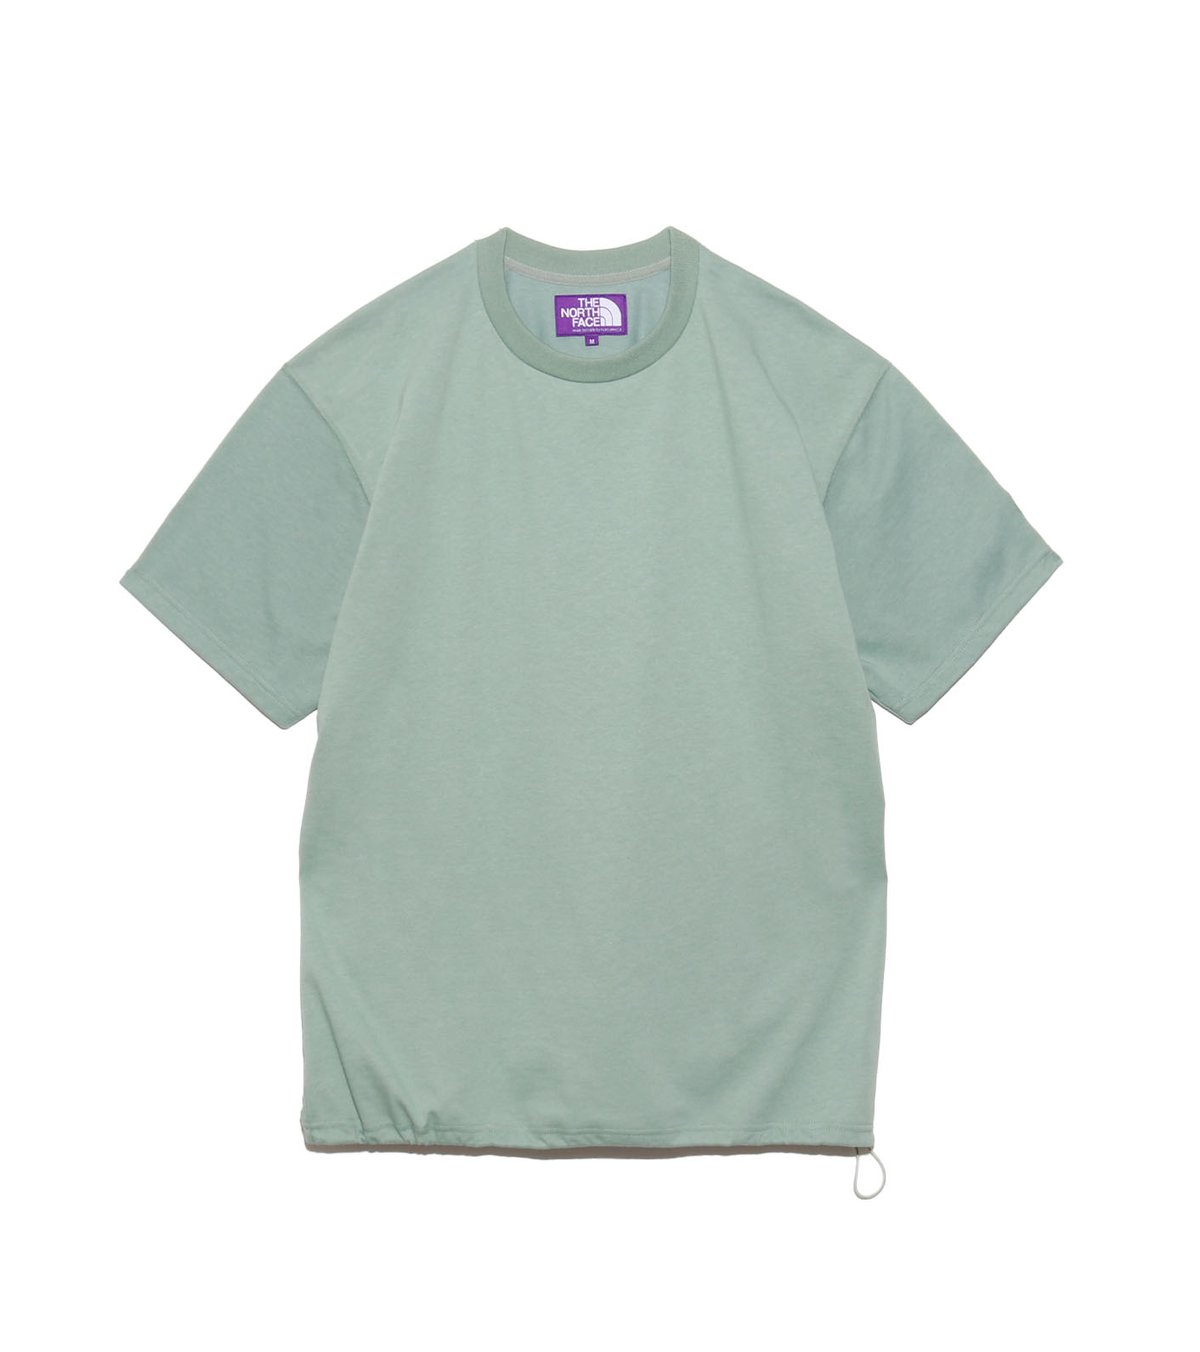 THE NORTH FACE PURPLE LABEL Field Tee / NT3351N / パープル 